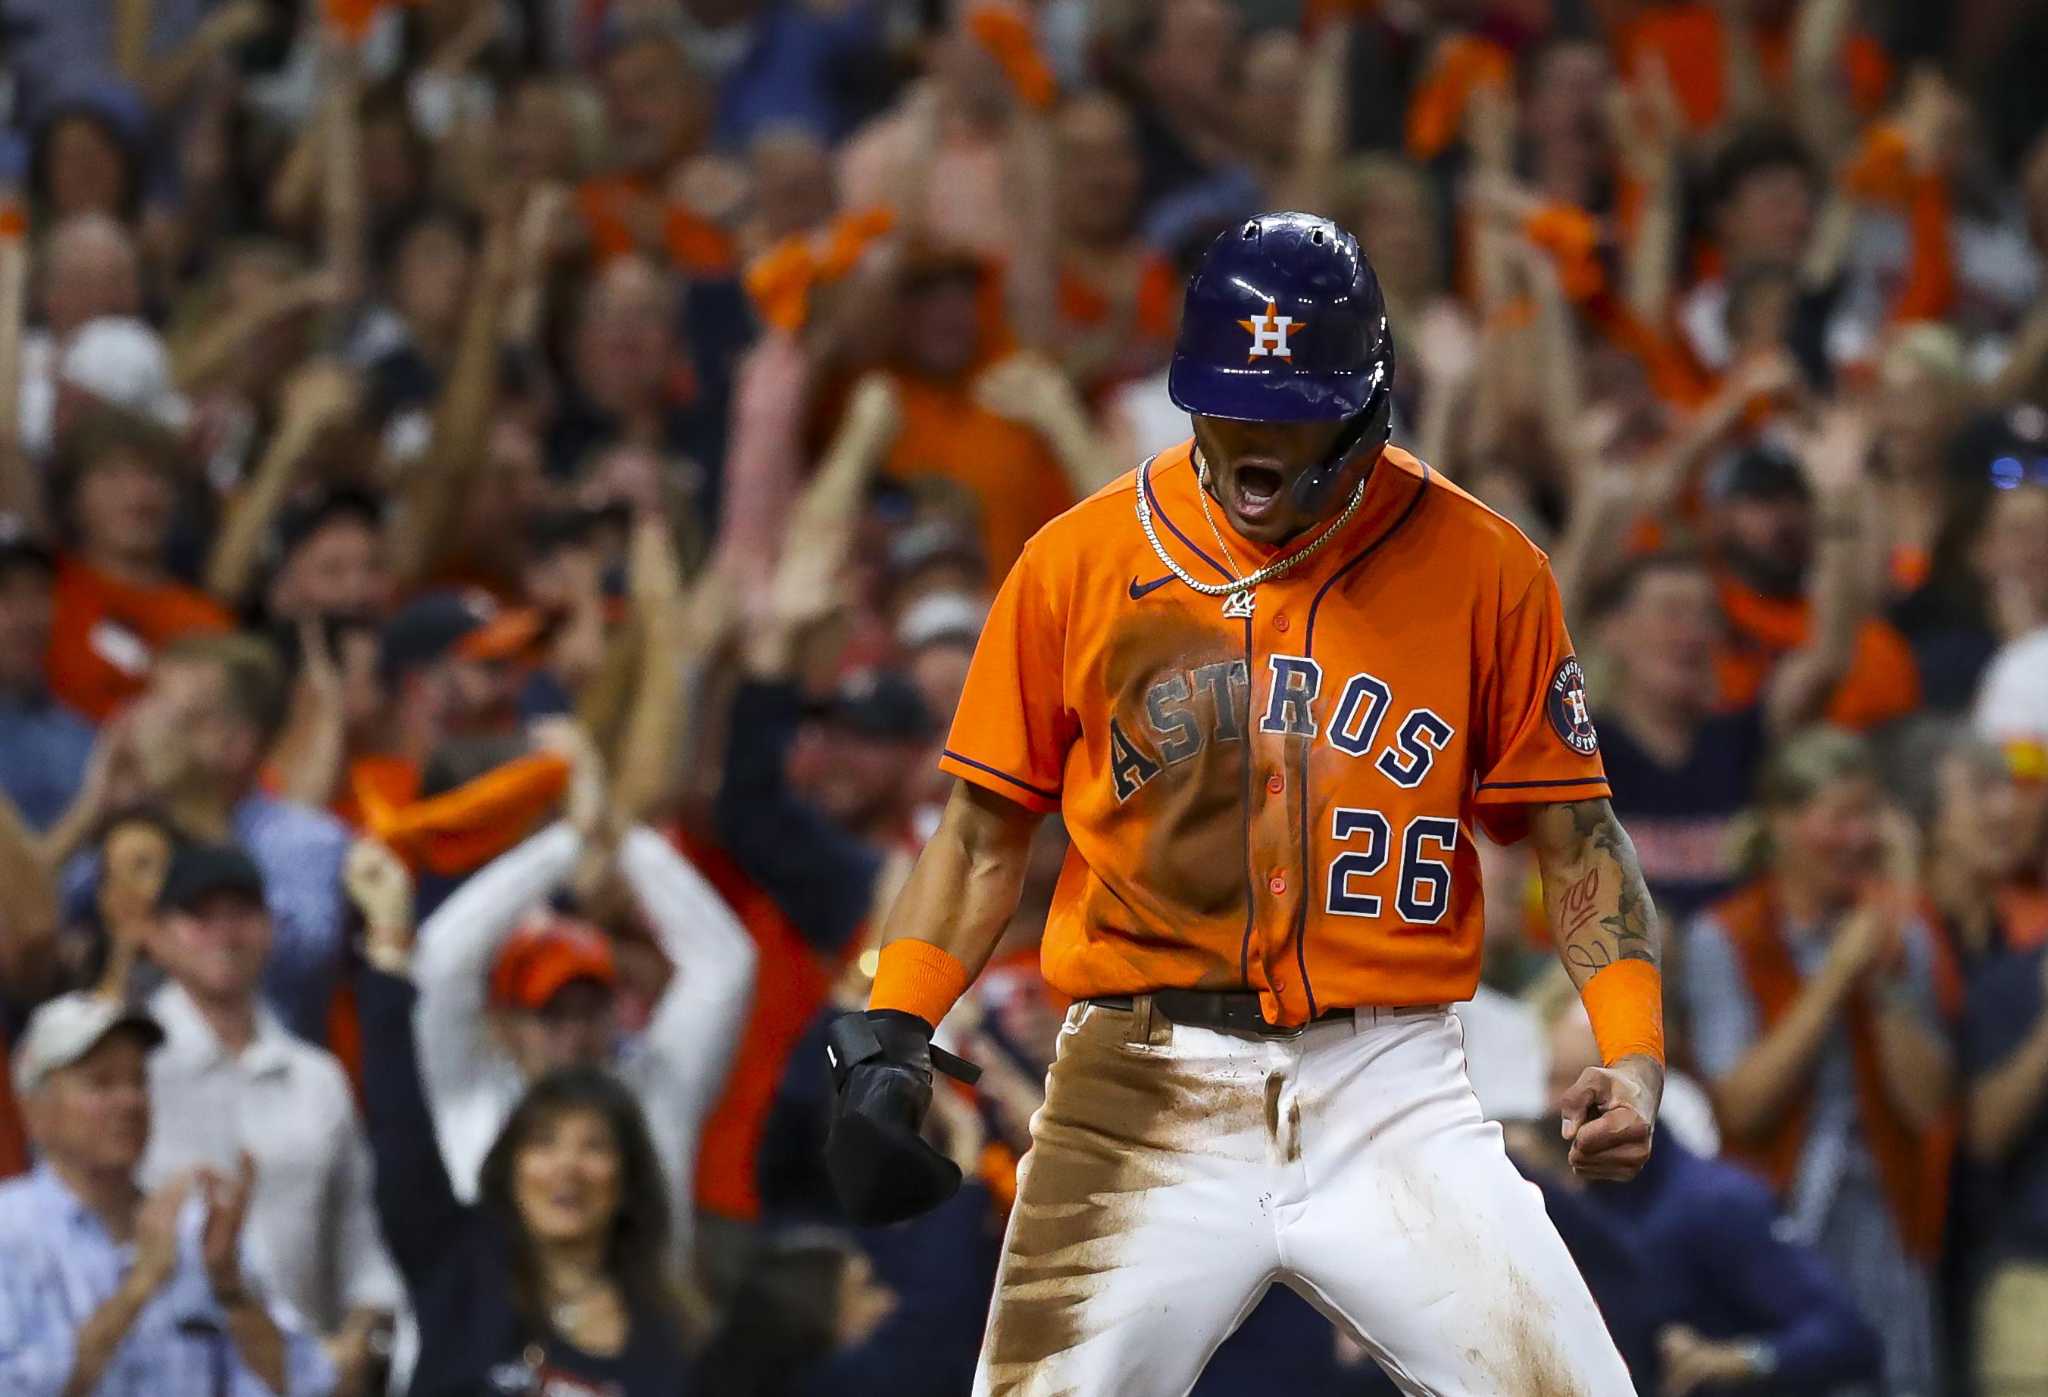 Jose Siri forces the action with his speed in Astros' Game 2 win